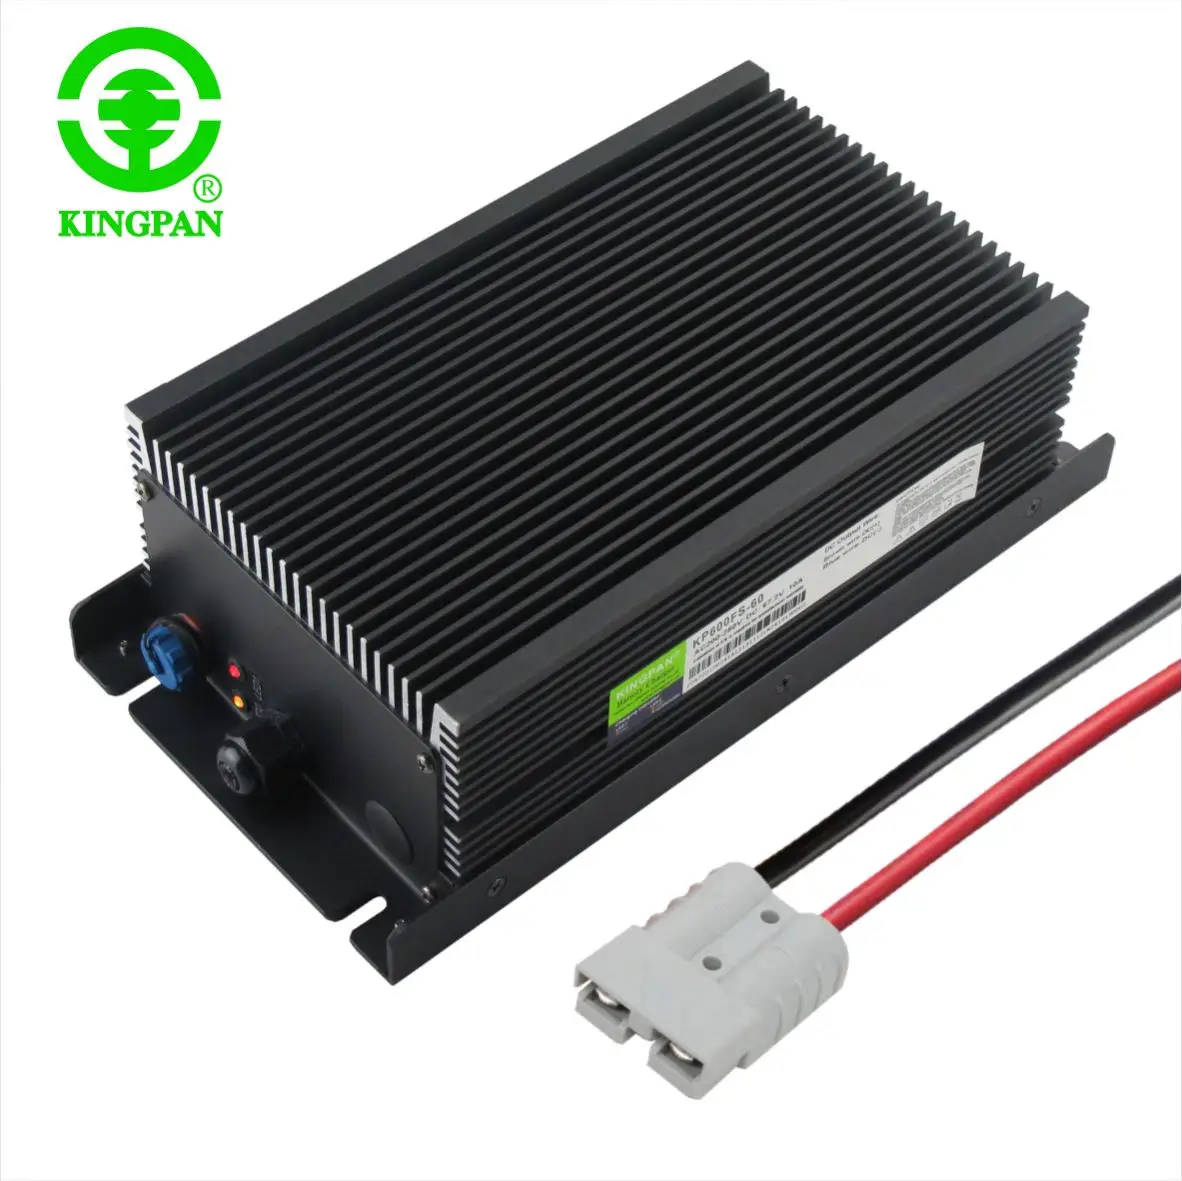 

Kingpan IP67 marine onboard 42V43.8V15A for outdoor waterproof battery charger for AGV forklift/robots/carting charger